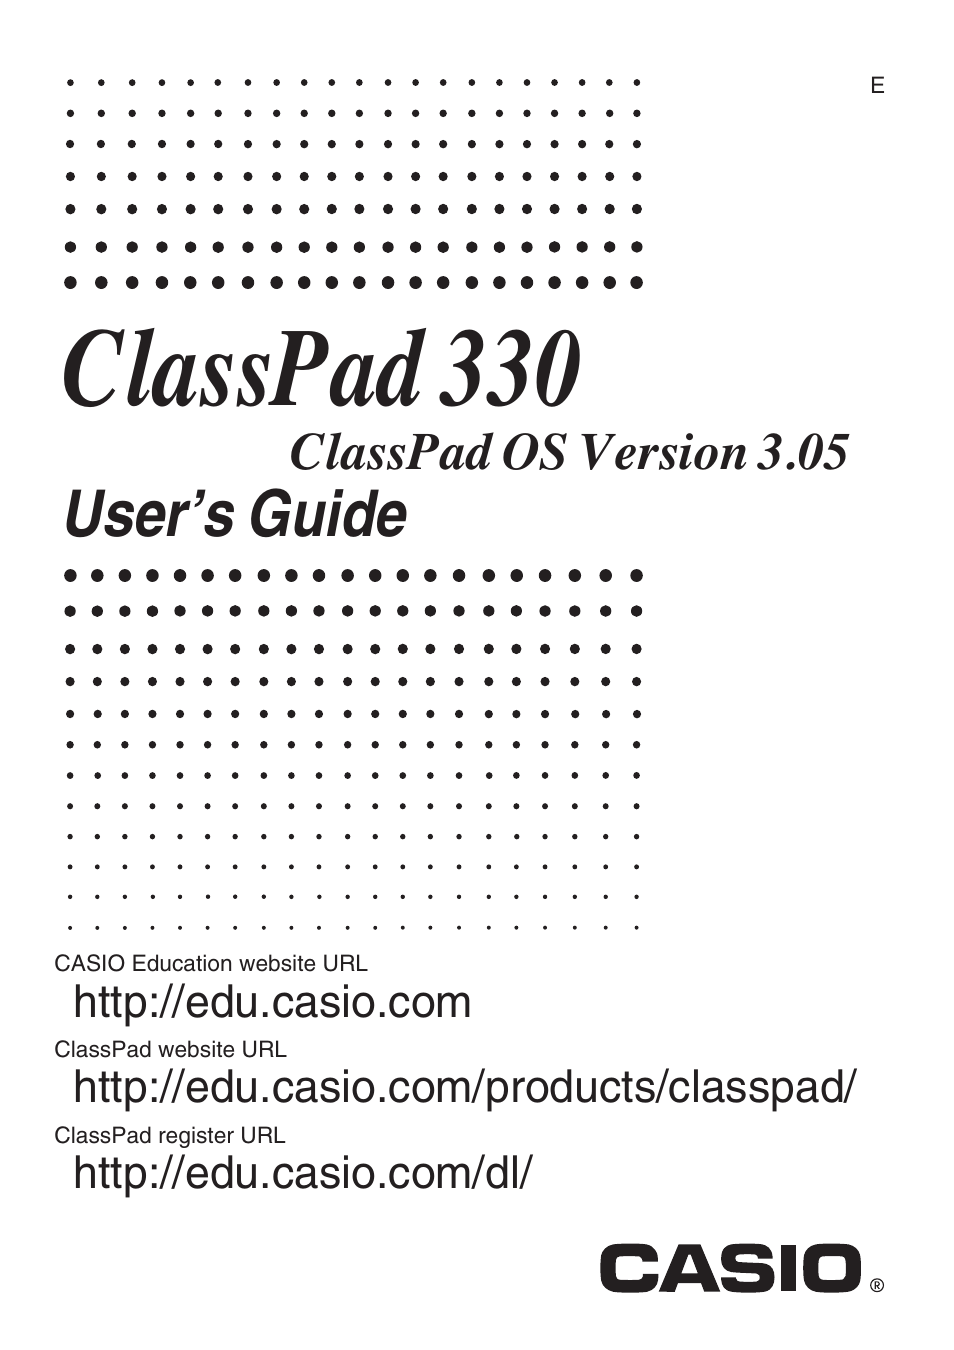 Casio 330 User Manual | 965 pages | Also for: ClassPad 330 V.3.06, ClassPad  300 PLUS, ClassPad 300, CLASSPAD 330 3.04, ClassPad 330 V.3.03, ClassPad  300 Spreadsheet Application, ClassPad 330 PLUS